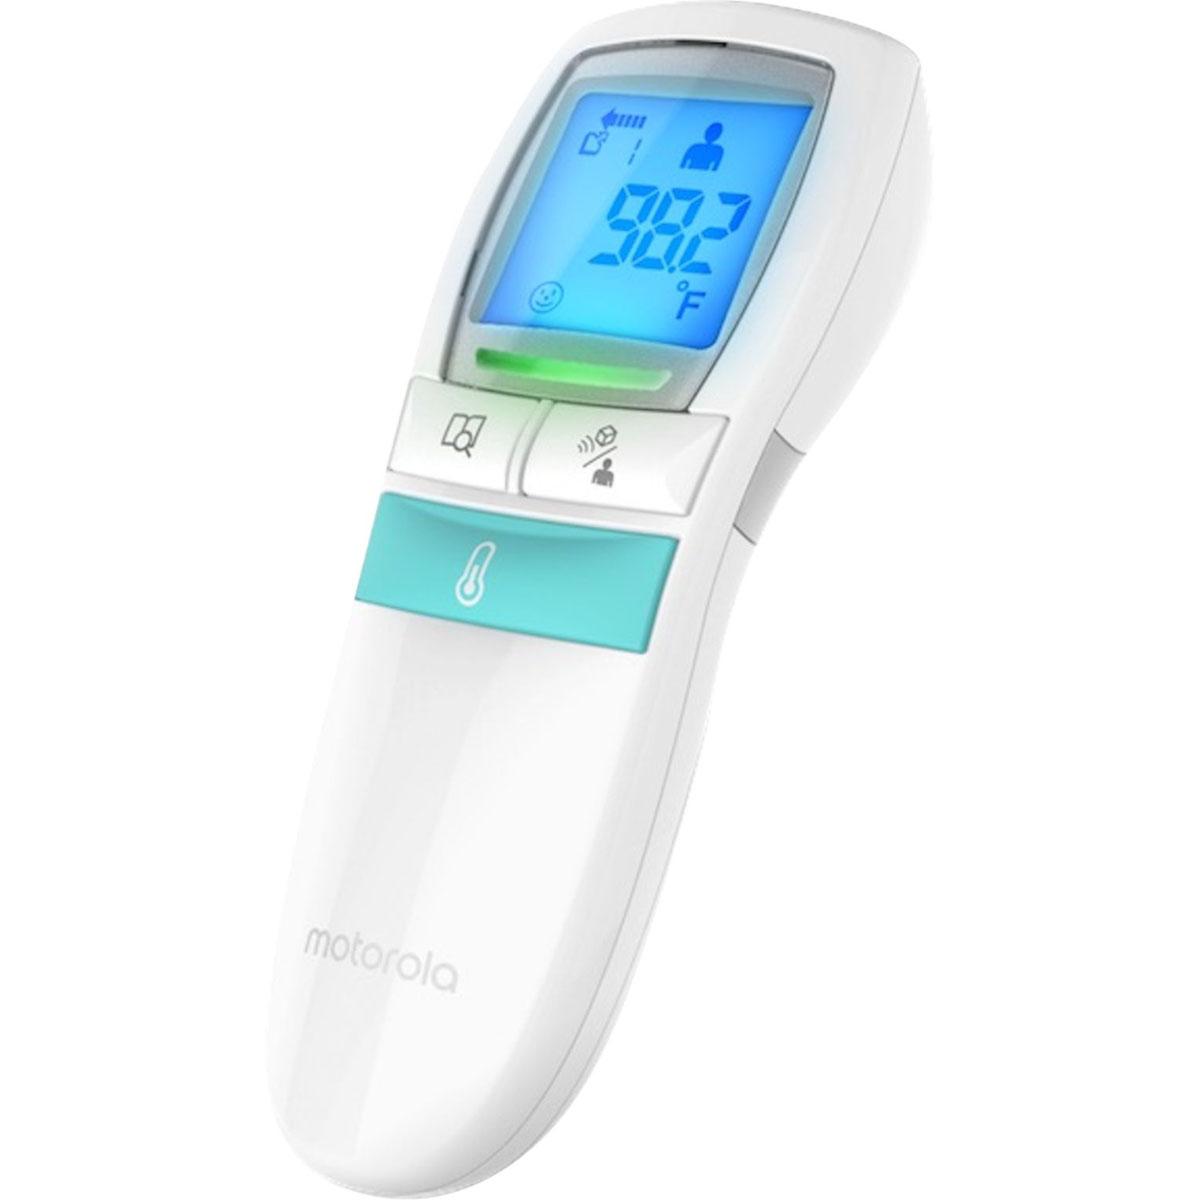 Motorola MBP66N Care 3-in-1 Non-Contact Baby Forehead Thermometer for $14.99